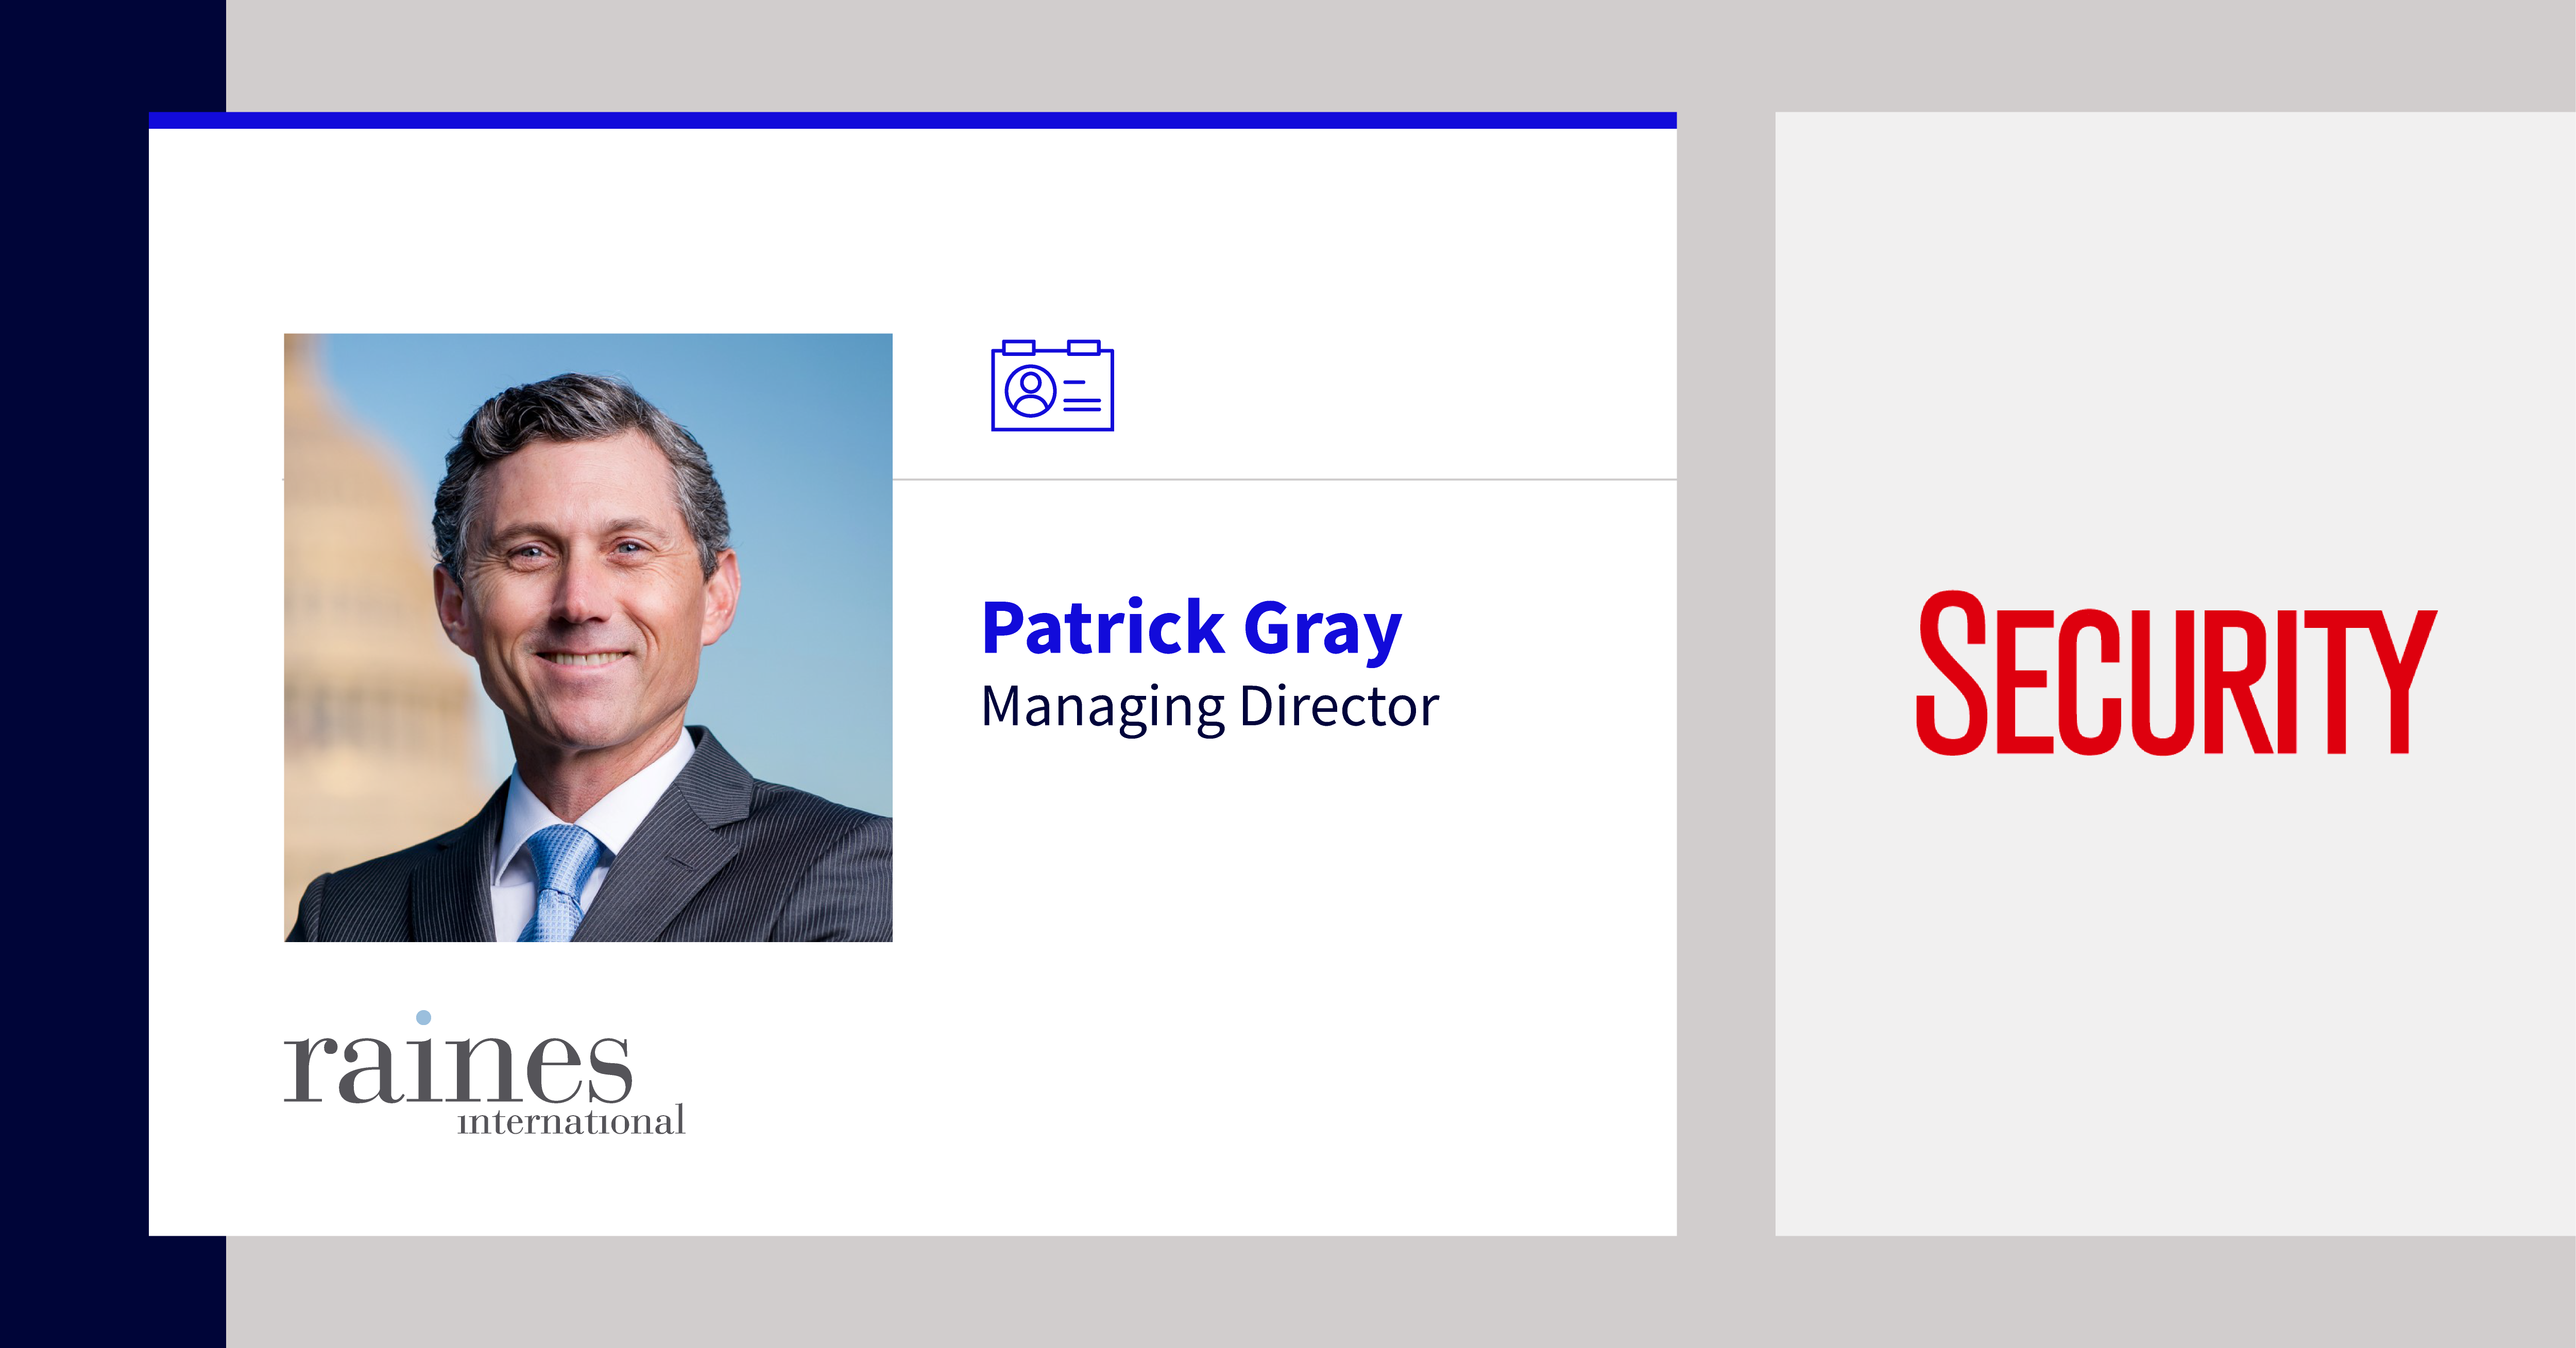 patrick gray headshot, security logo, chief risk officers article